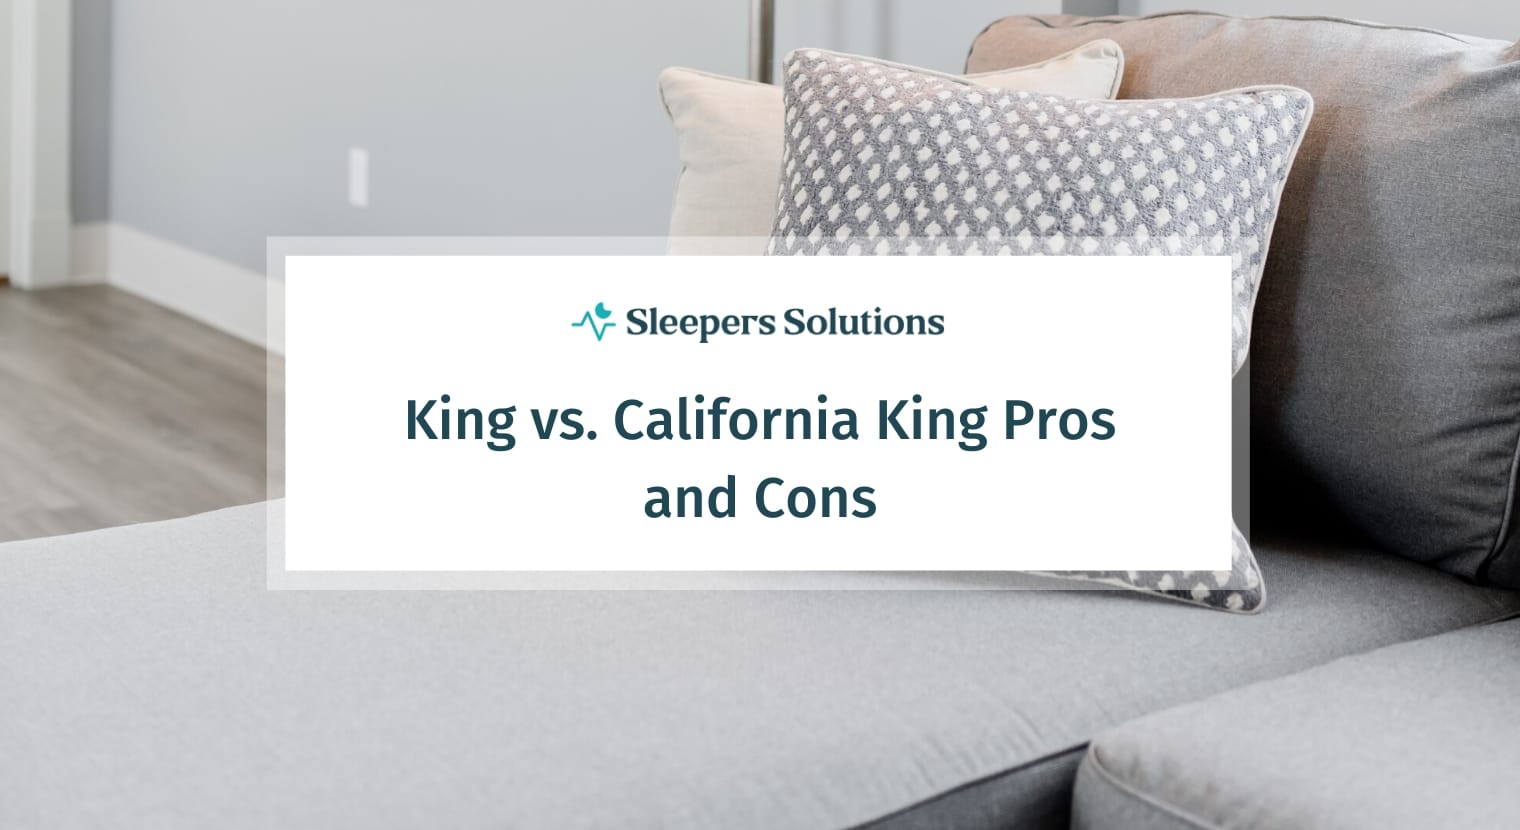 King vs. California King Pros and Cons